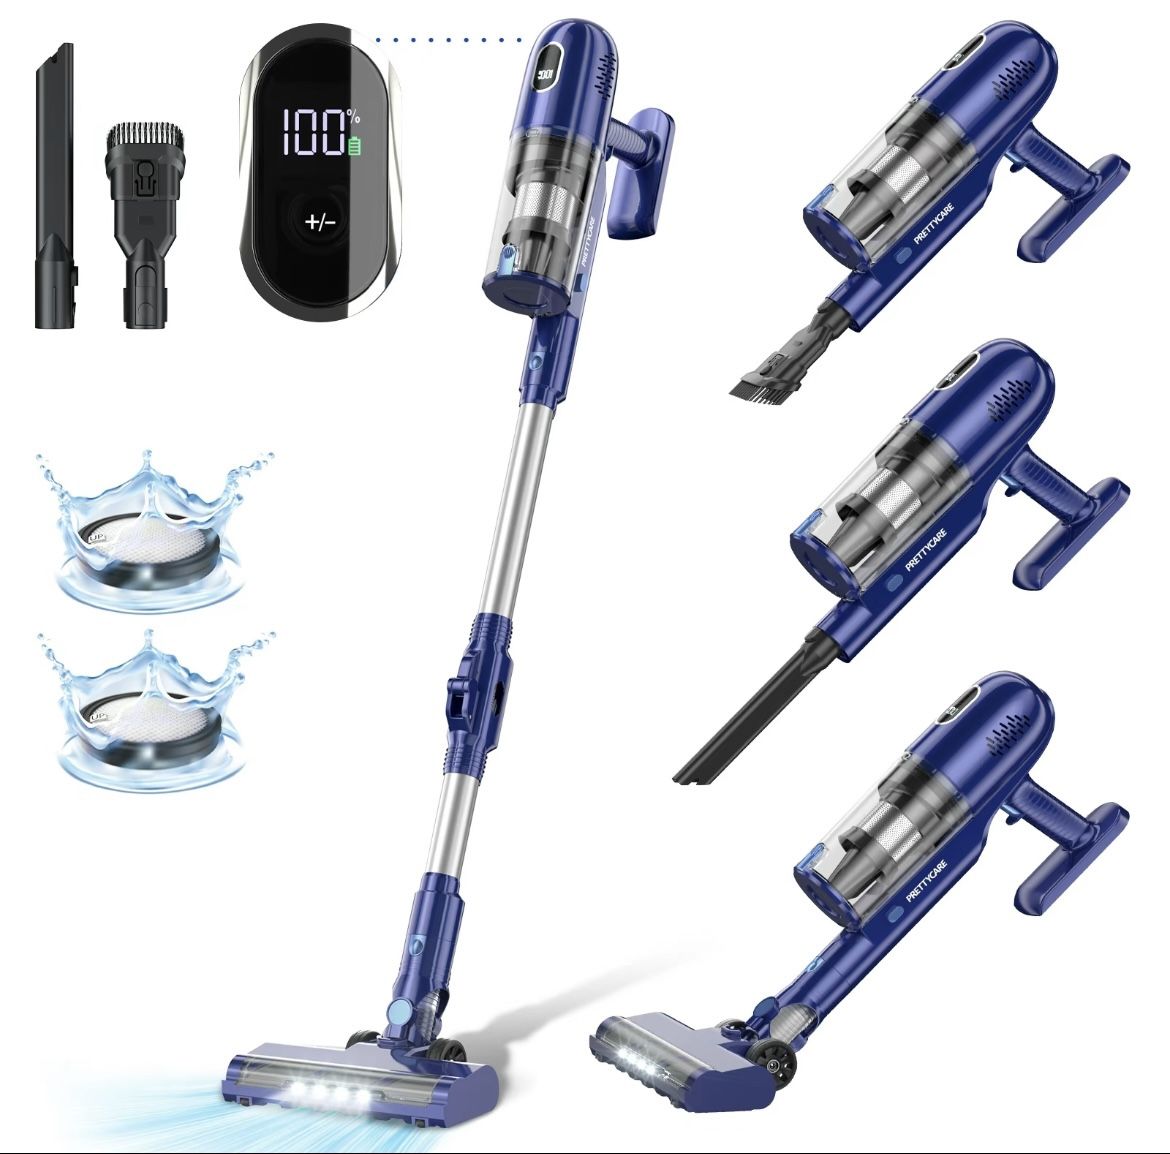 New In Box 26000Pa Powerful Lightweight Stick Cordless Vacuum Cleaner For Pet Hair Carpet Hard Floor 